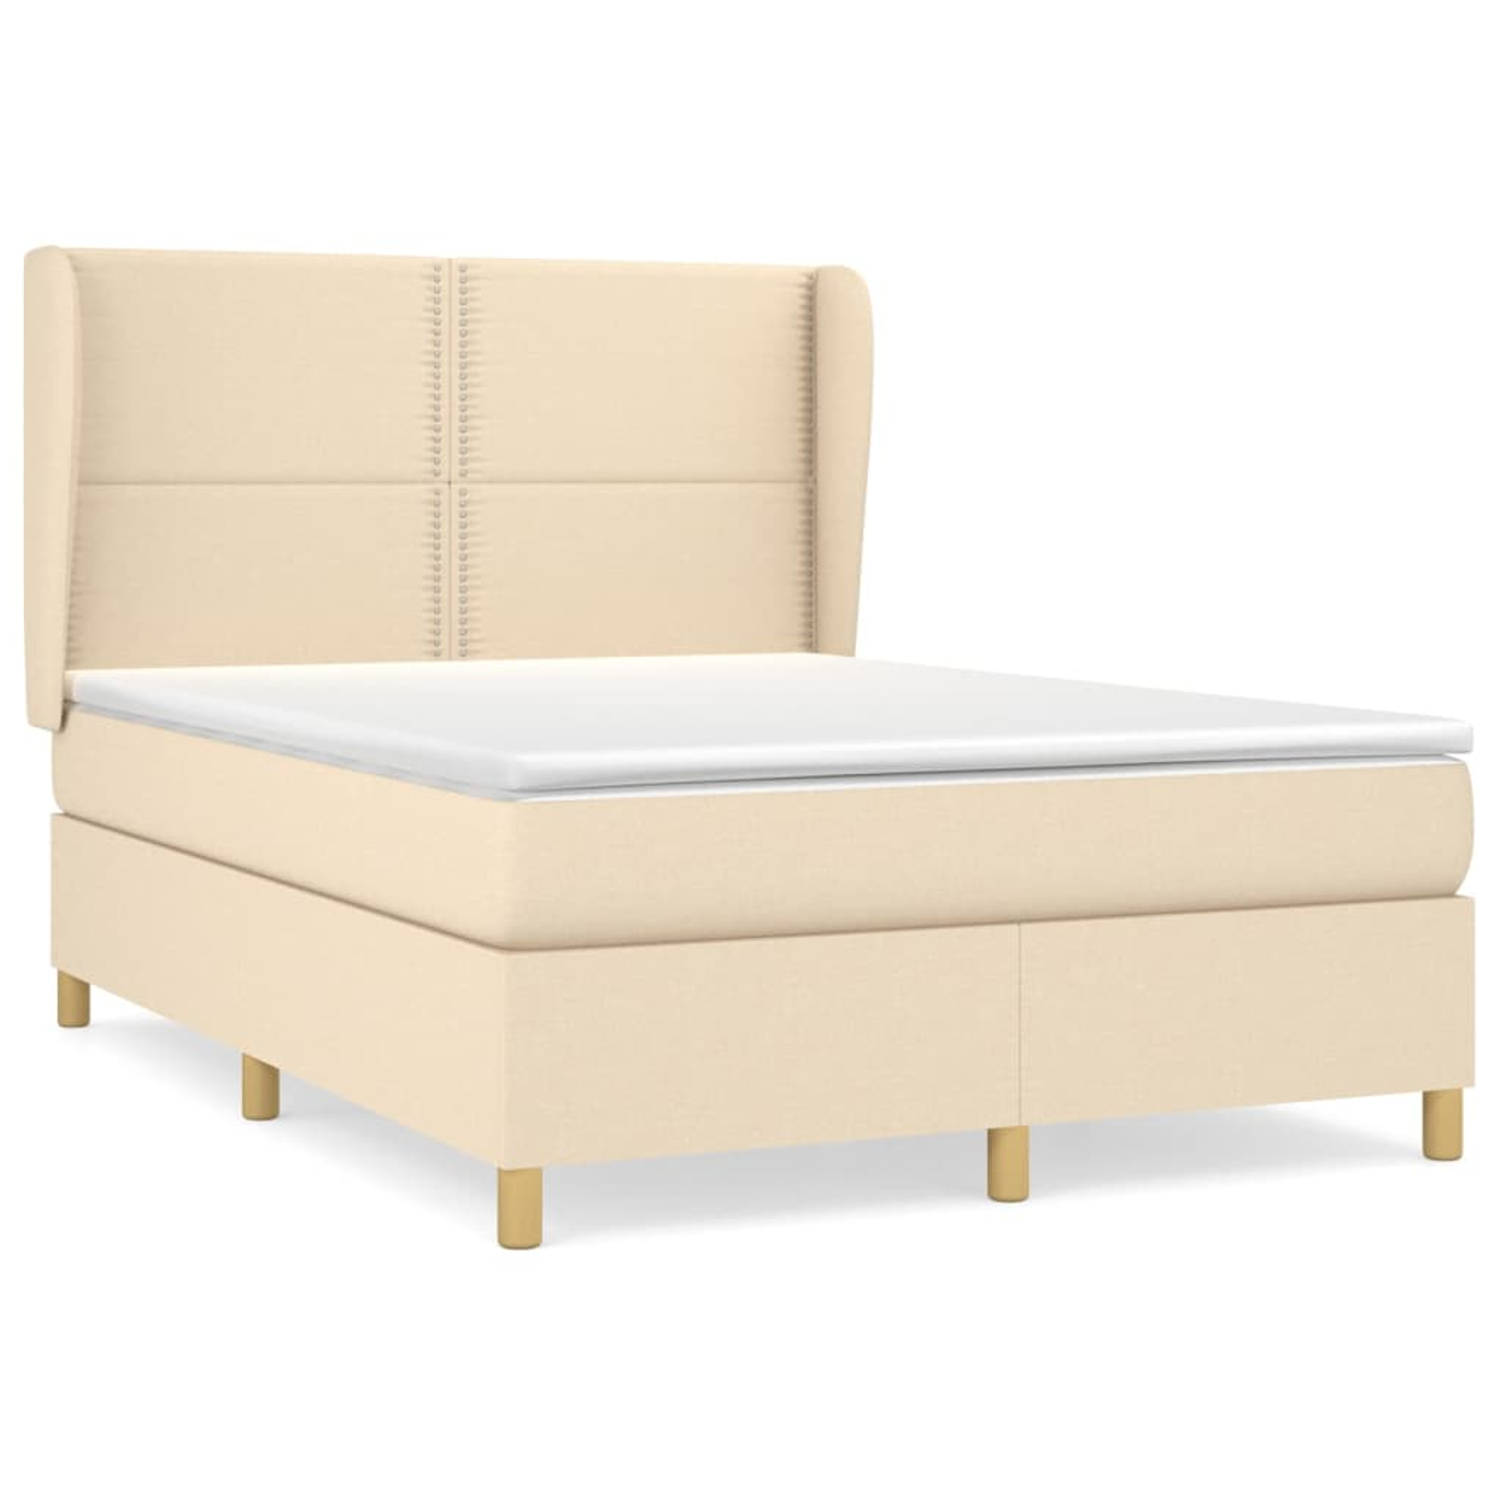 The Living Store Boxspringbed - Comfort - Bed - 193x147x118/128 cm - Crème